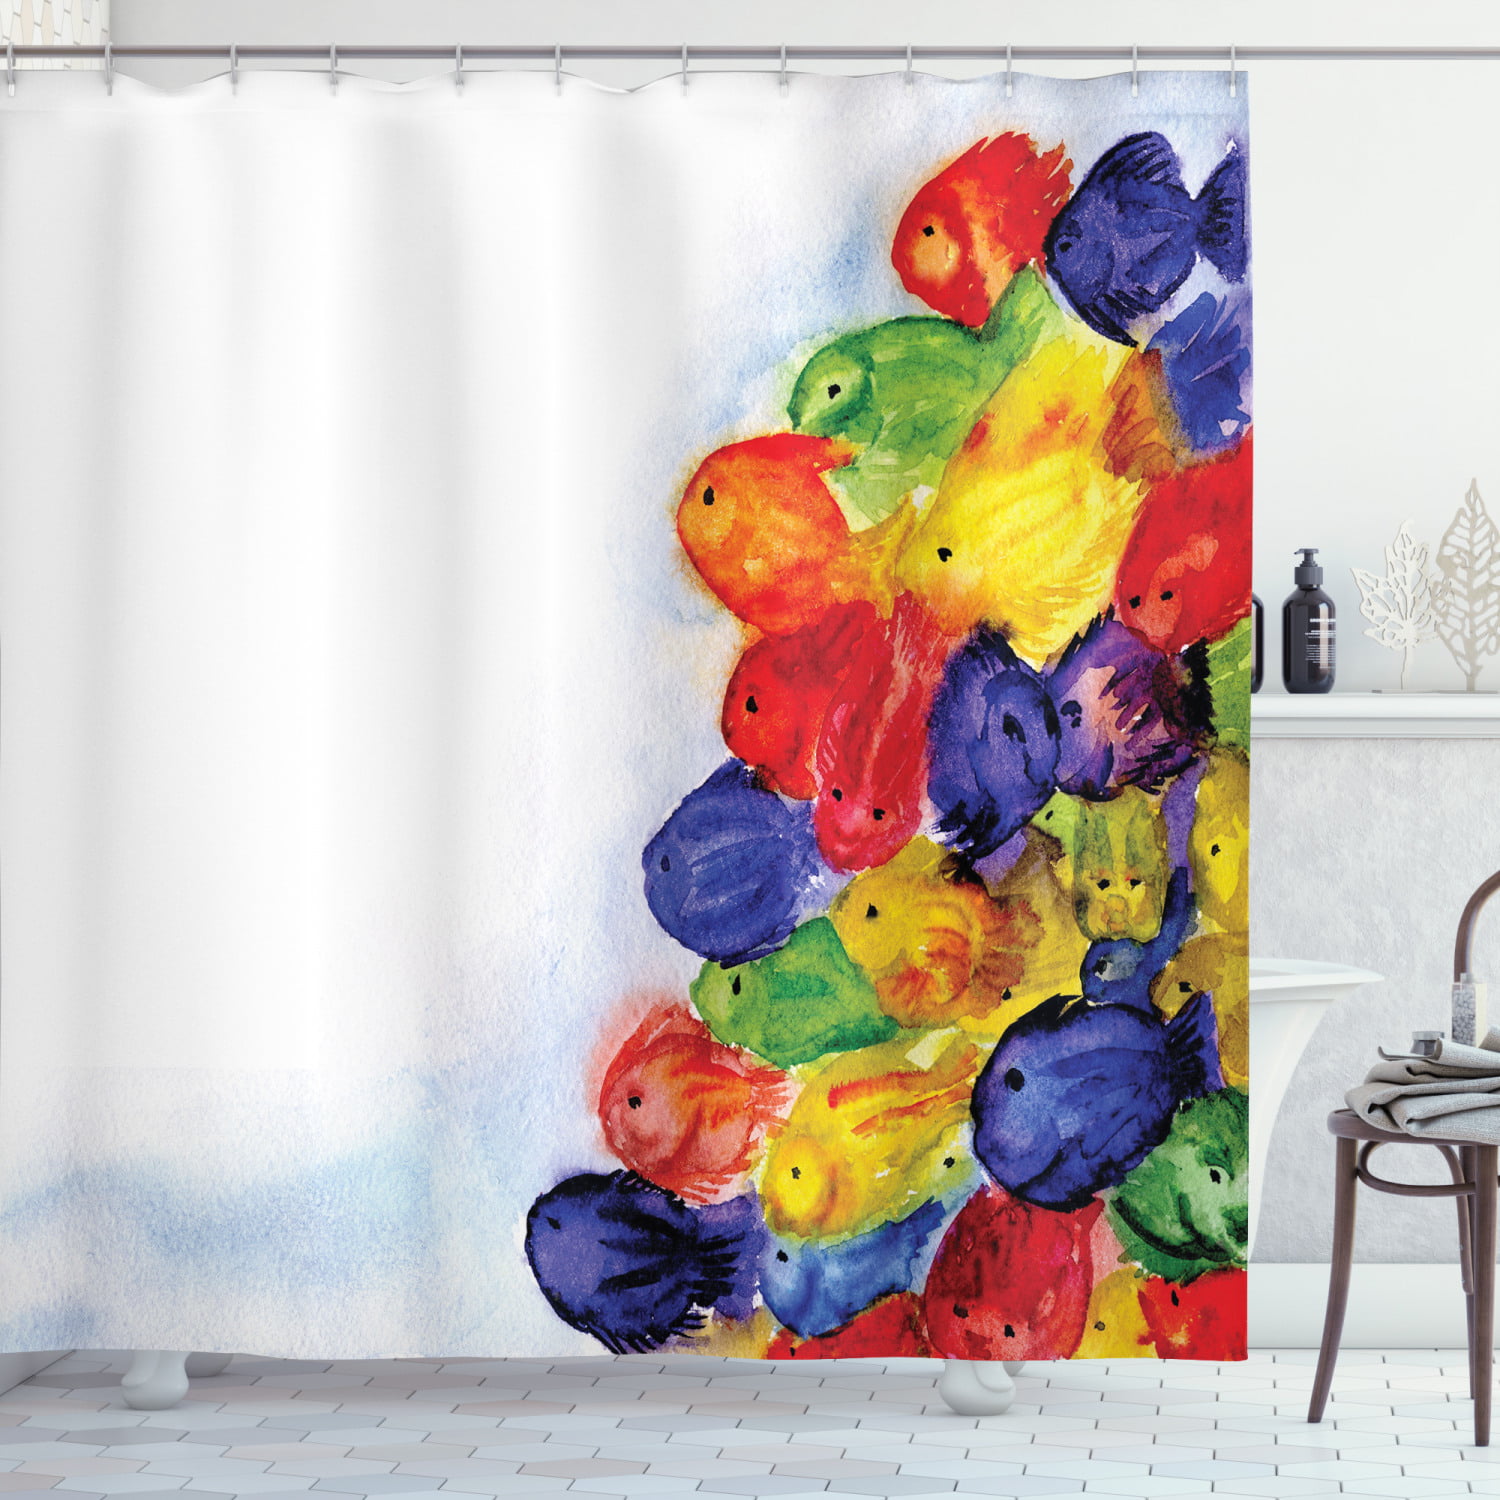 Abstract flowers watercolor painting Shower Curtain Bathroom Fabric & 12hooks 